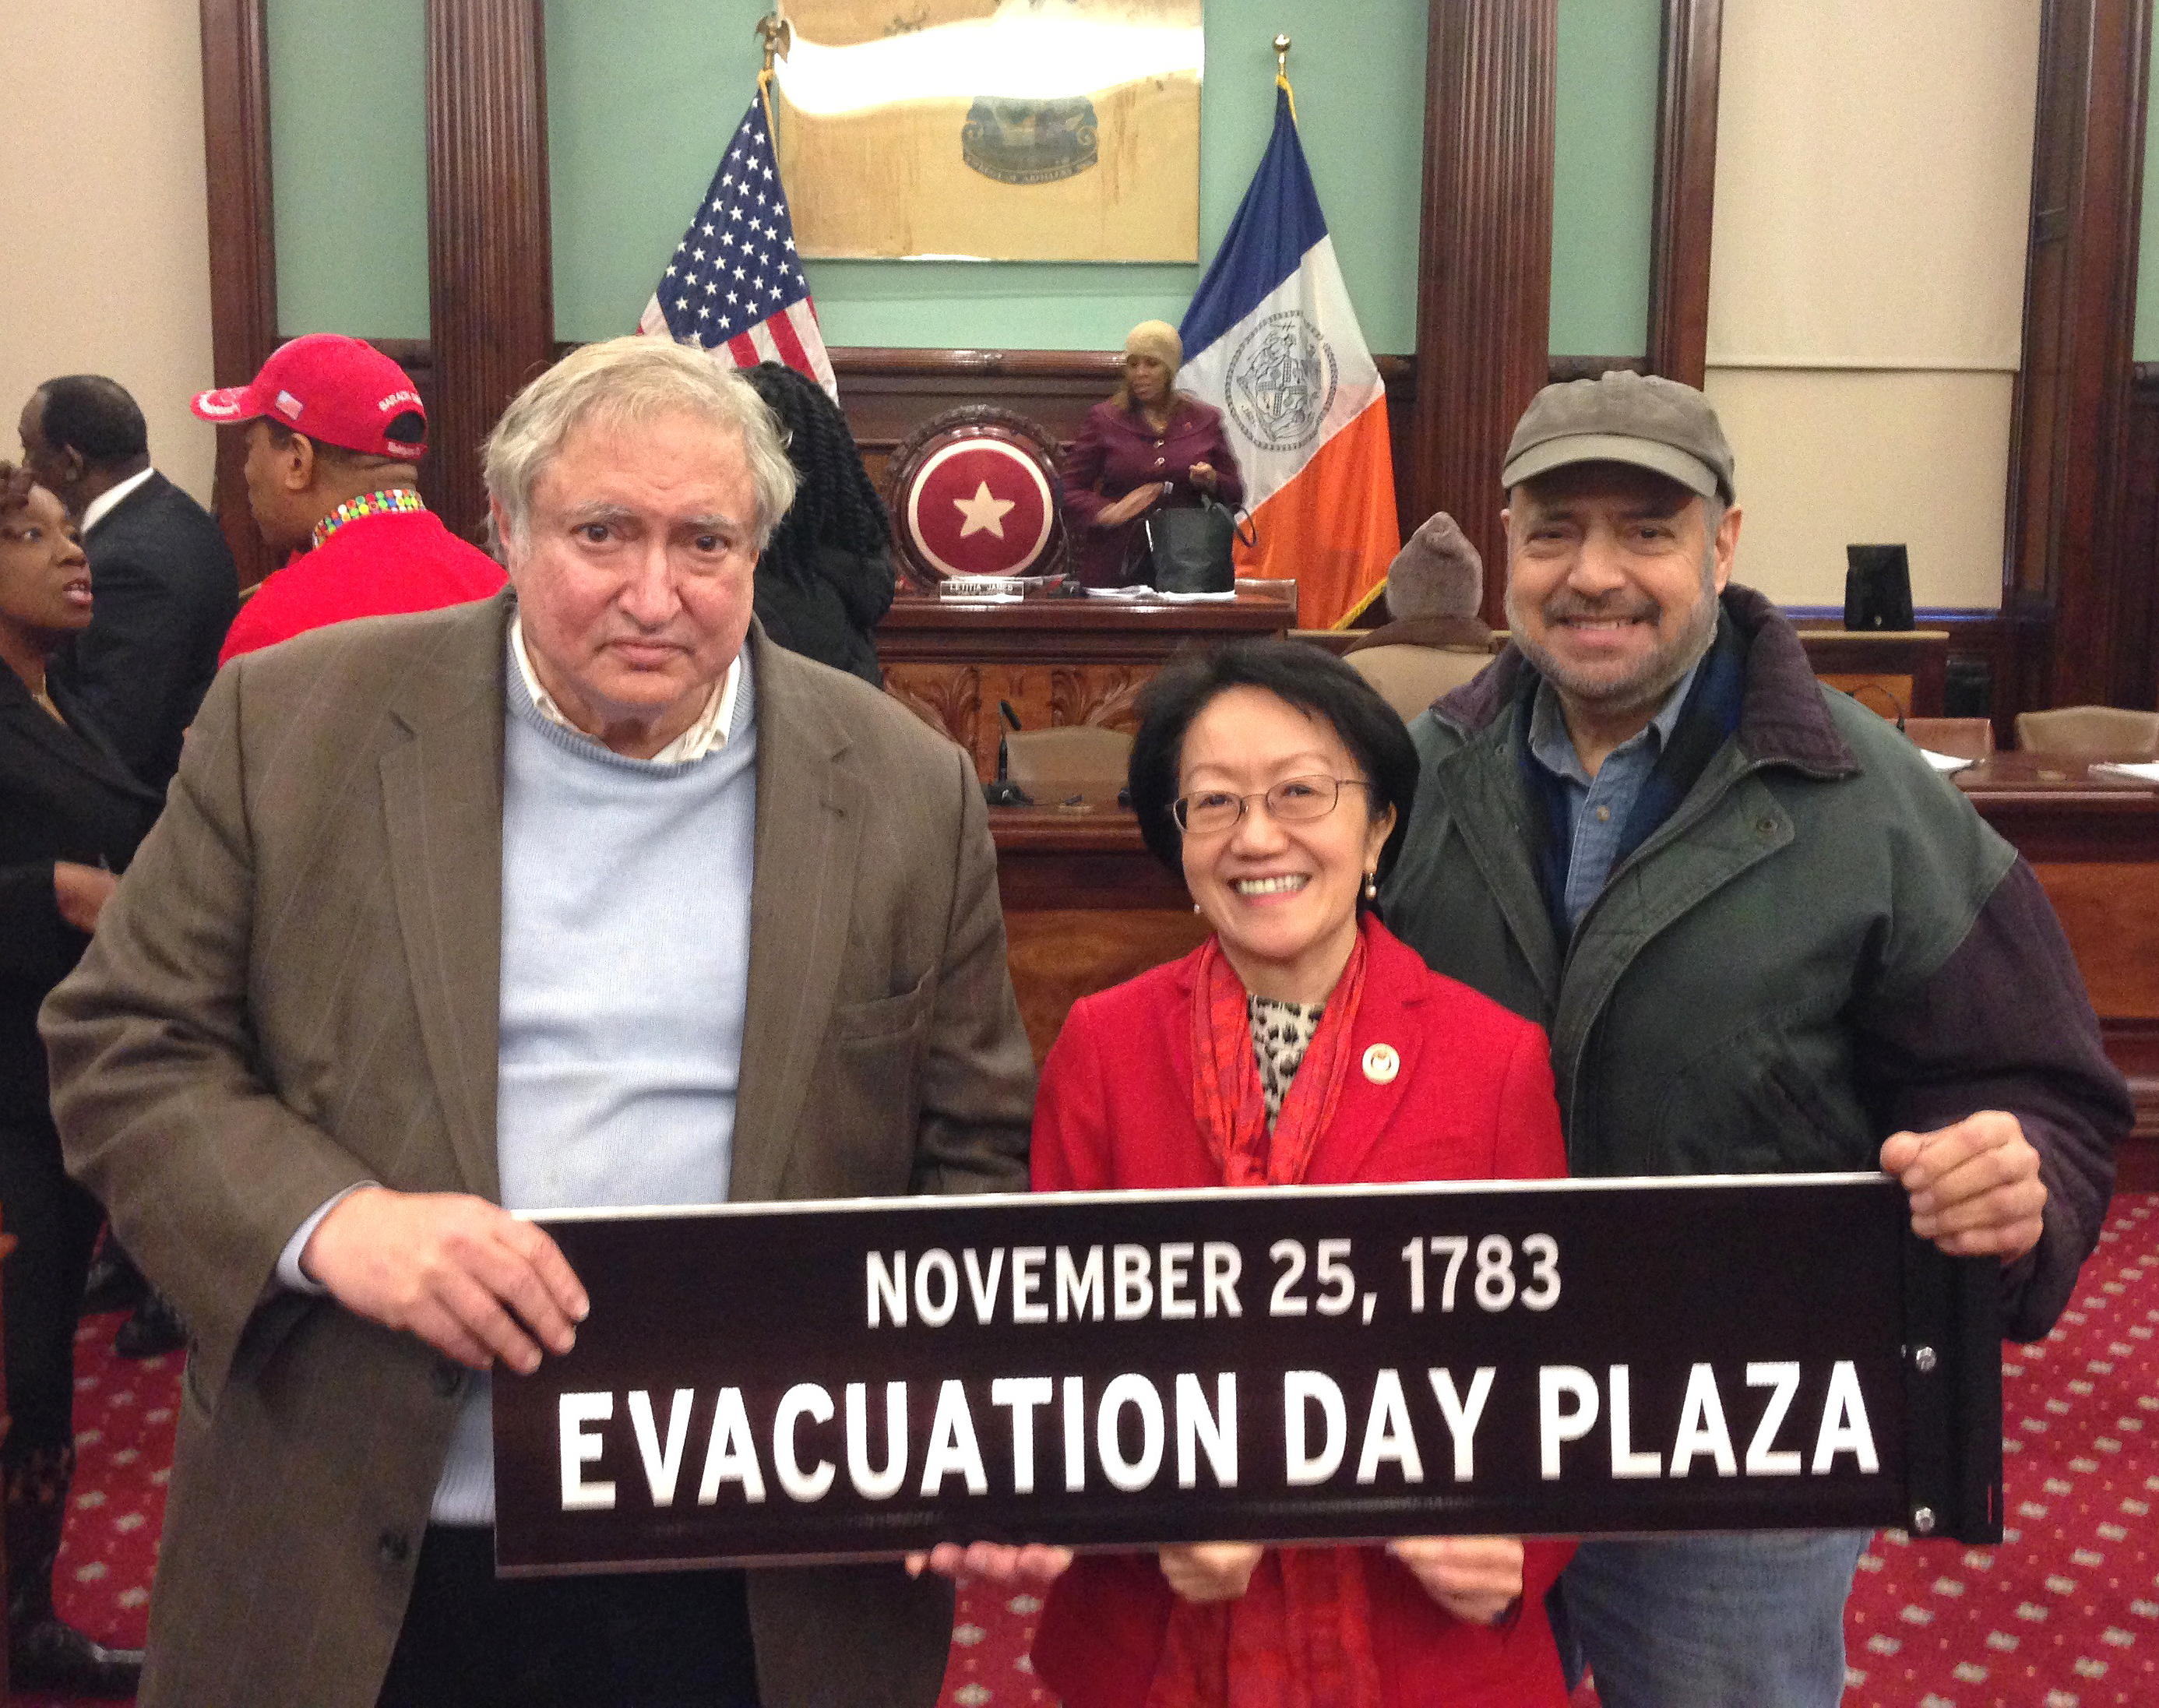 Photo courtesy of Arthur Piccolo Downtown’s Councilmember Margaret Chin, center, beams in the Council chamber as she holds up the “Evacuation Day Plaza” sign just approved for Bowling Green, flanked by Lower Manhattan Historical Society co-founder James Kaplan on the left, and Bowling Green Association head Arthur Piccolo on the right.